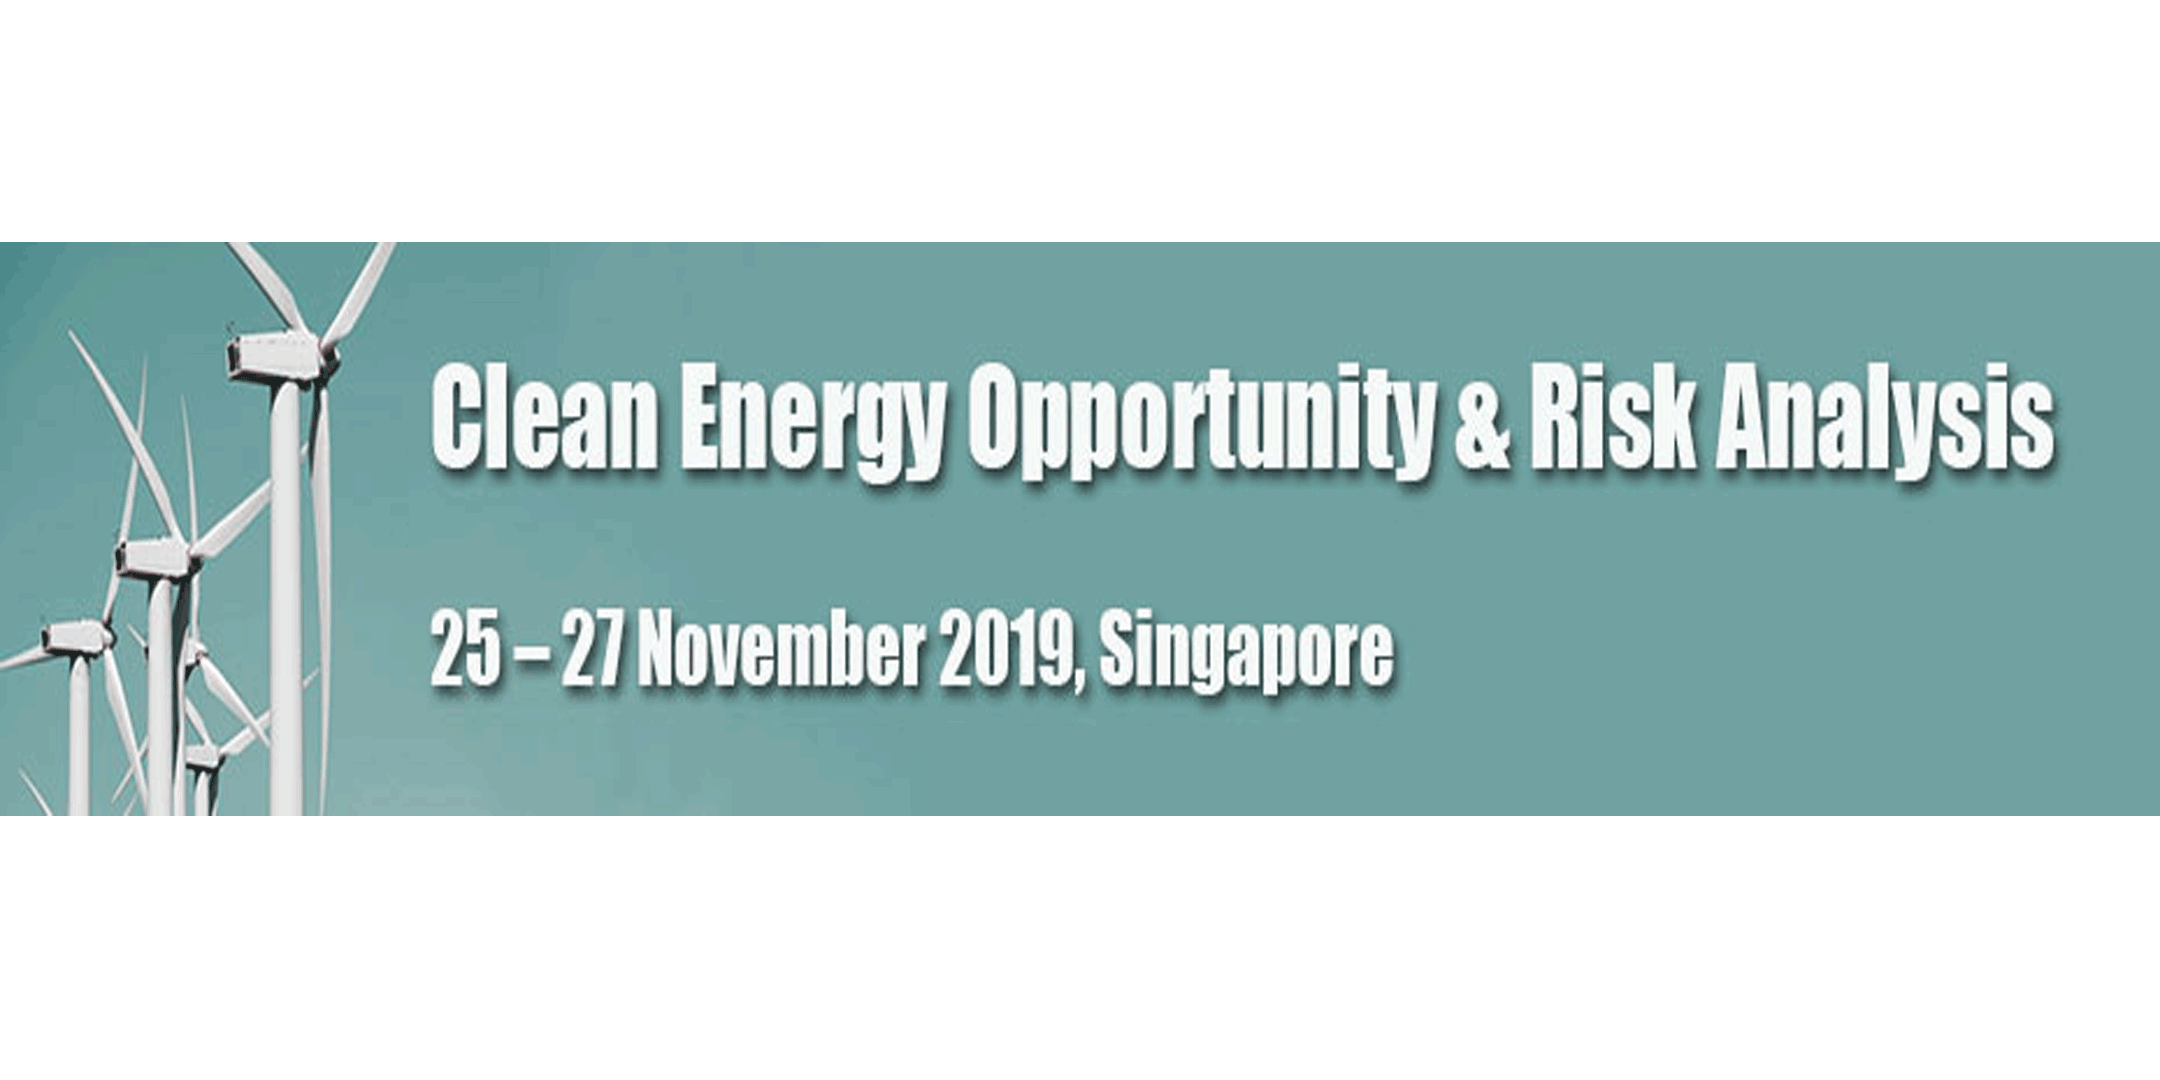 Clean Energy Opportunity & Risk Analysis, Singapore